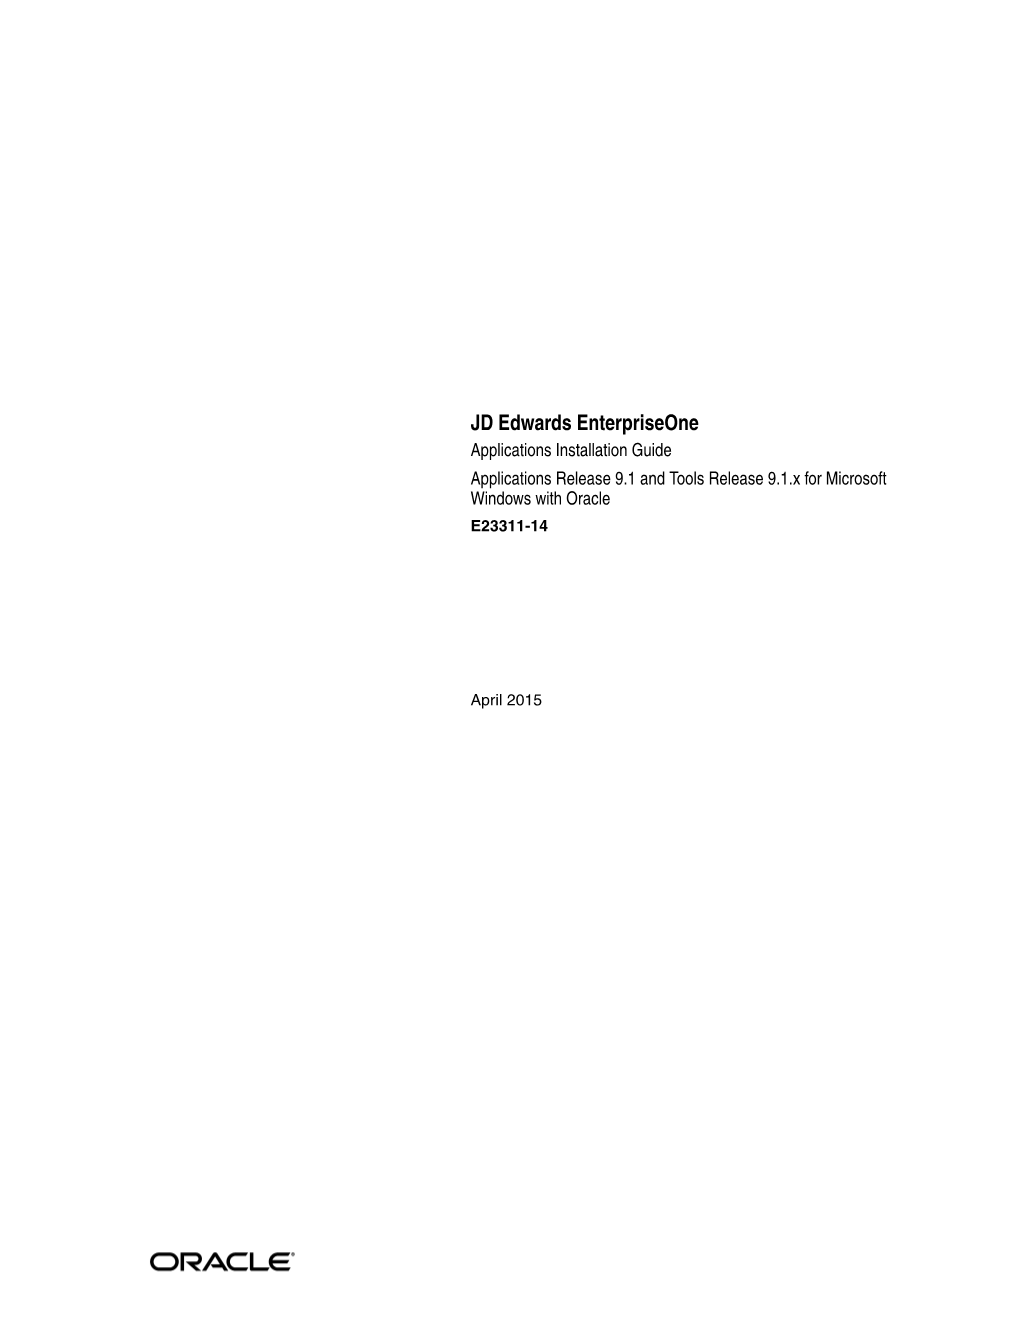 JD Edwards Enterpriseone Applications Installation Guide For